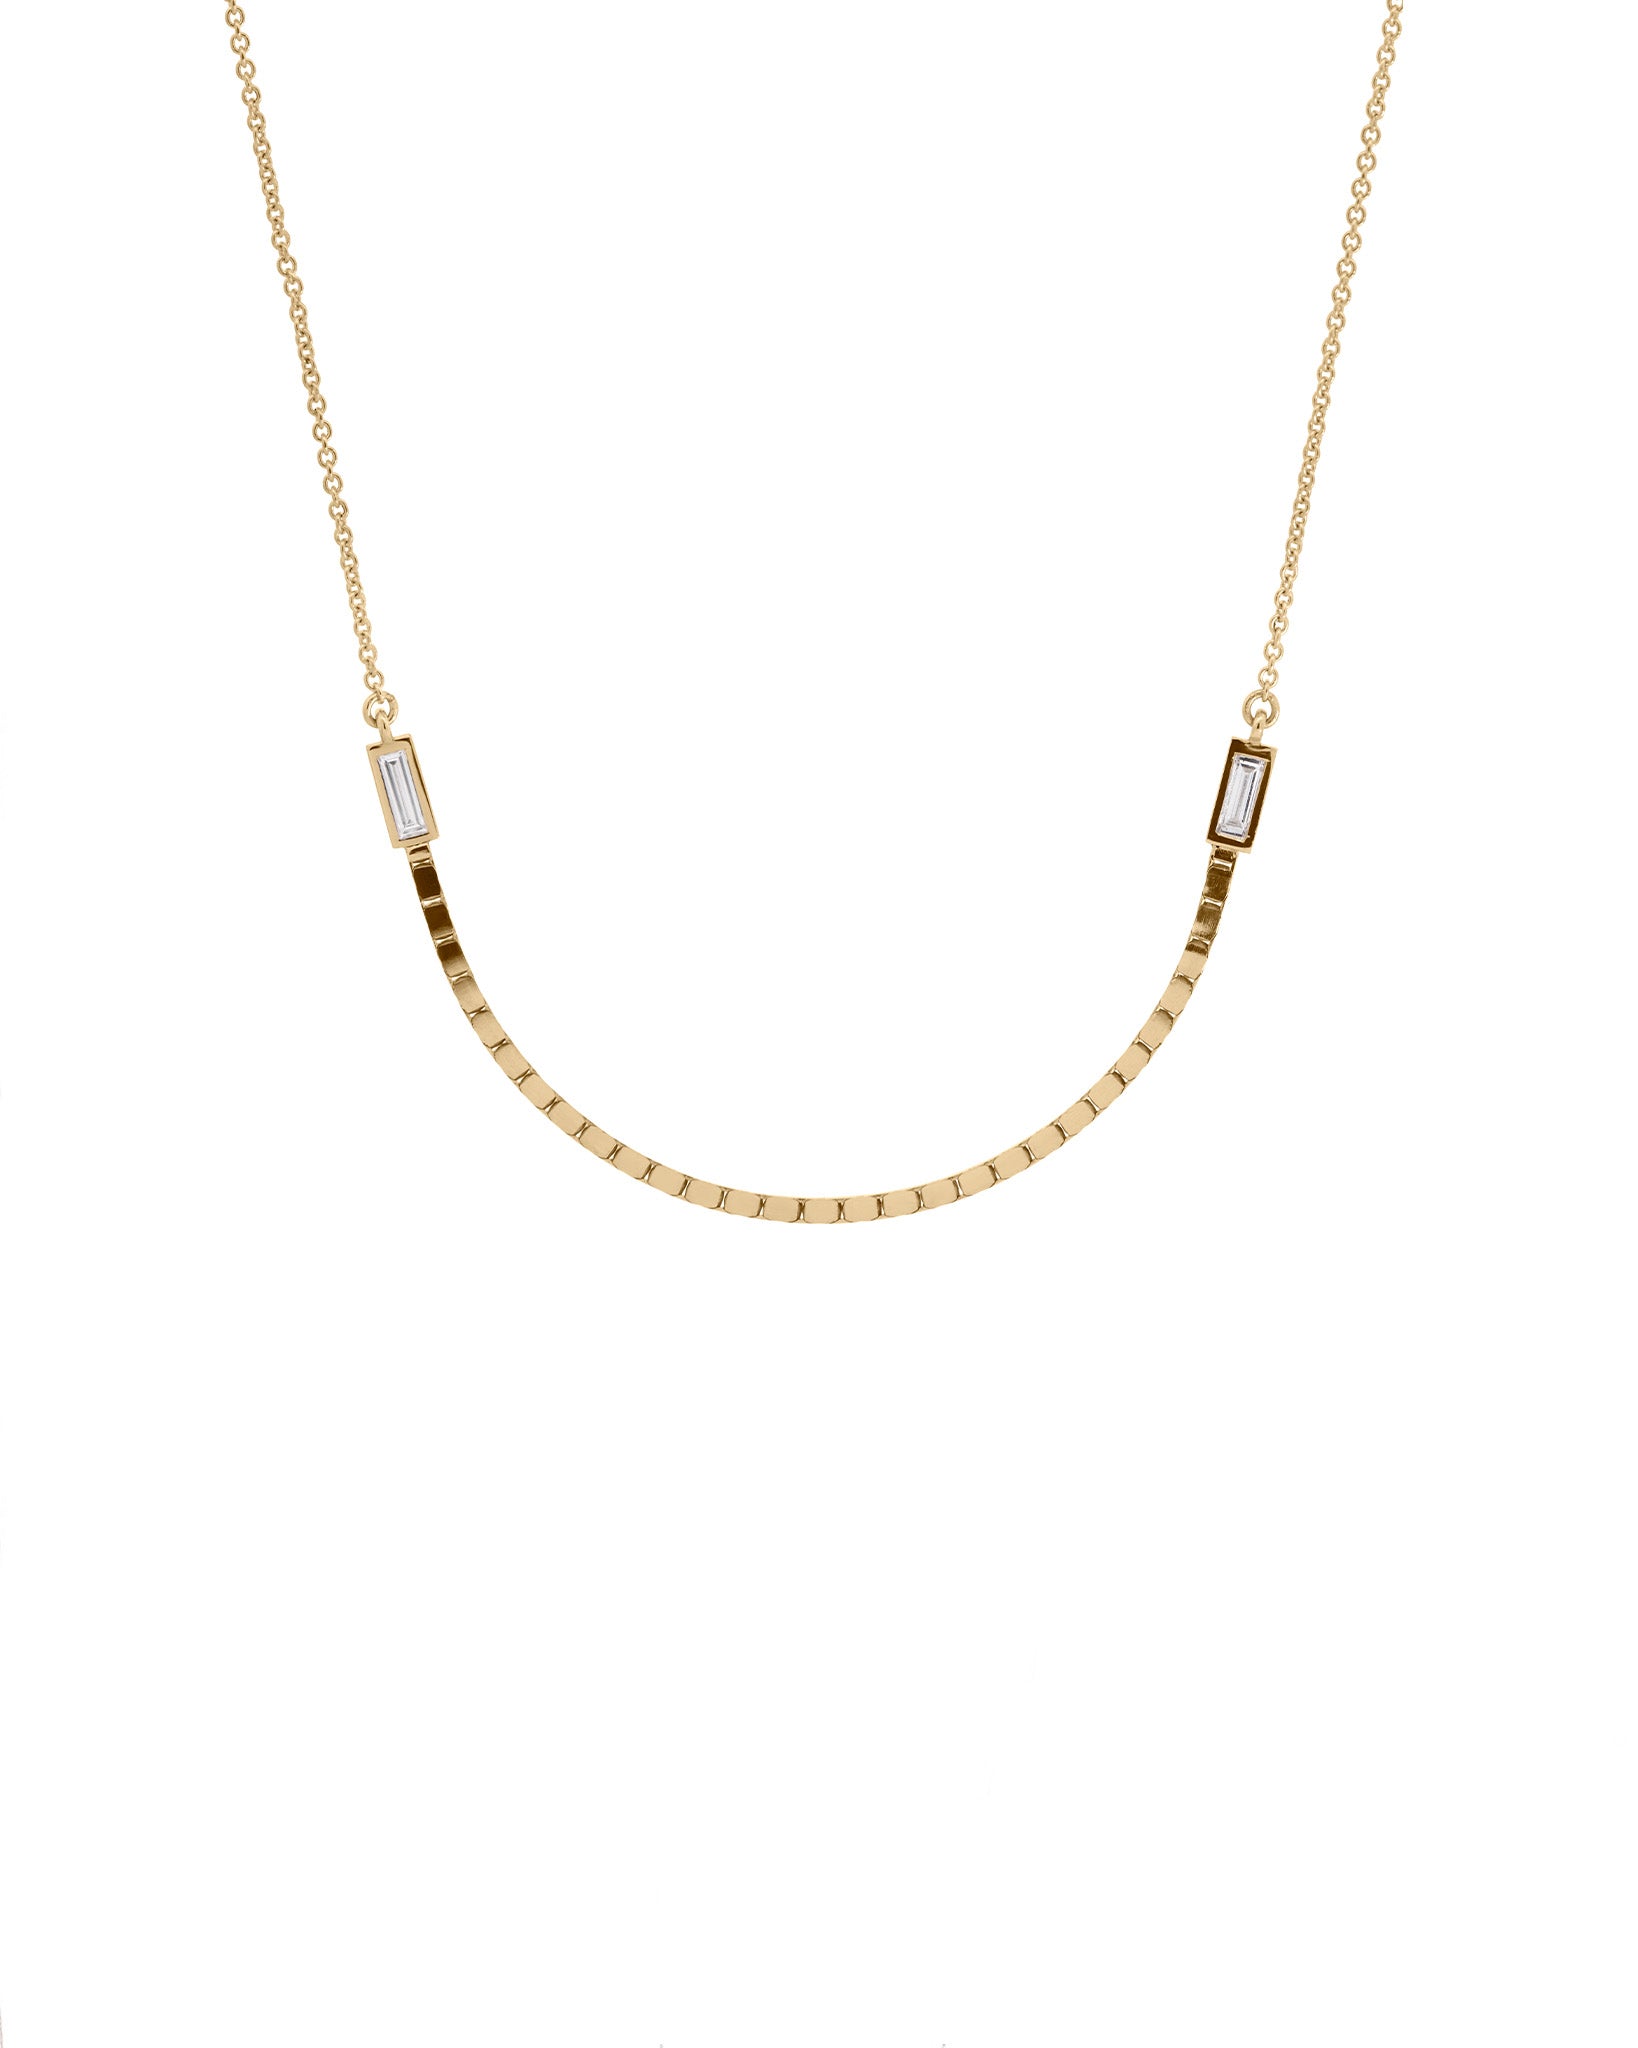 Halo Necklace. Chain and box chain combine with two tapered baguette lab diamonds 